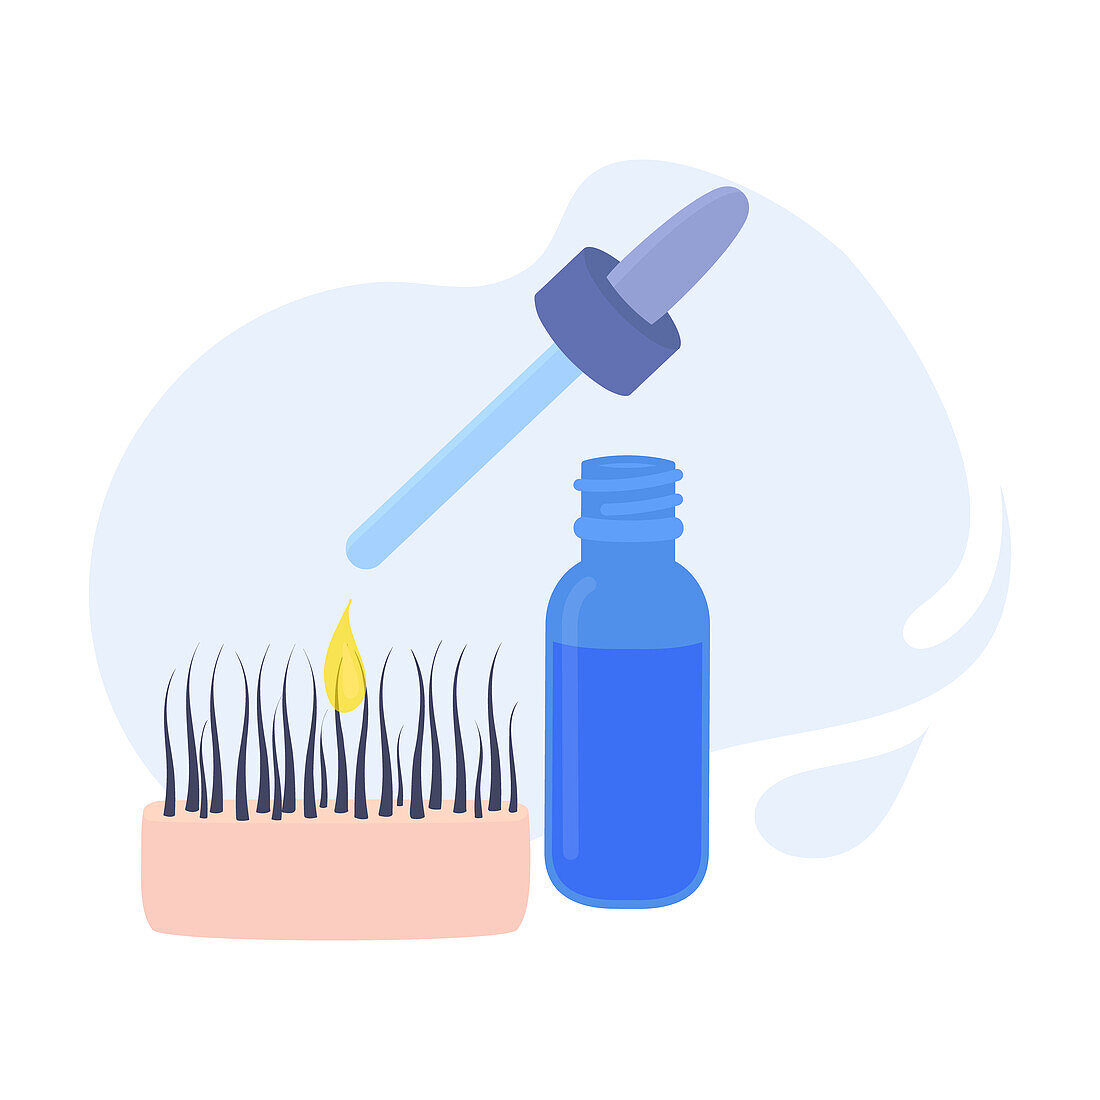 Hair treatment and strengthening, conceptual illustration